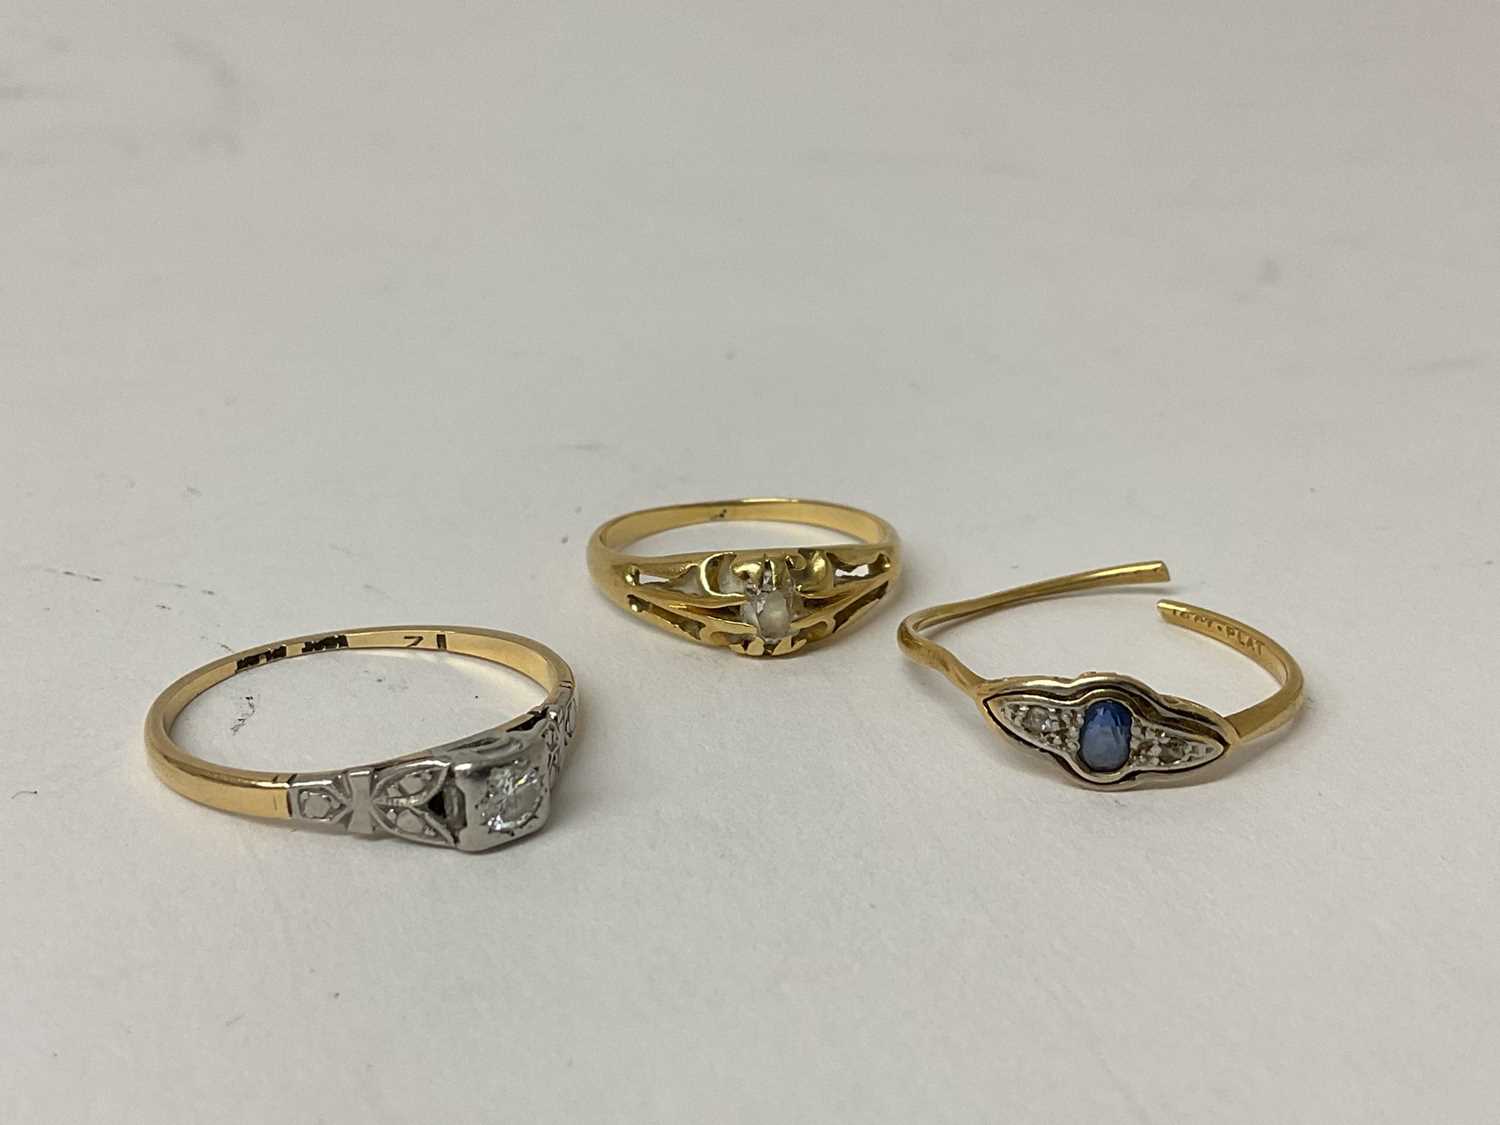 Lot 93 - 18ct gold diamond single stone ring, ring size Q, another 18ct gold diamond single stone ring, ring size L and an 18ct gold gem set dress ring (3).